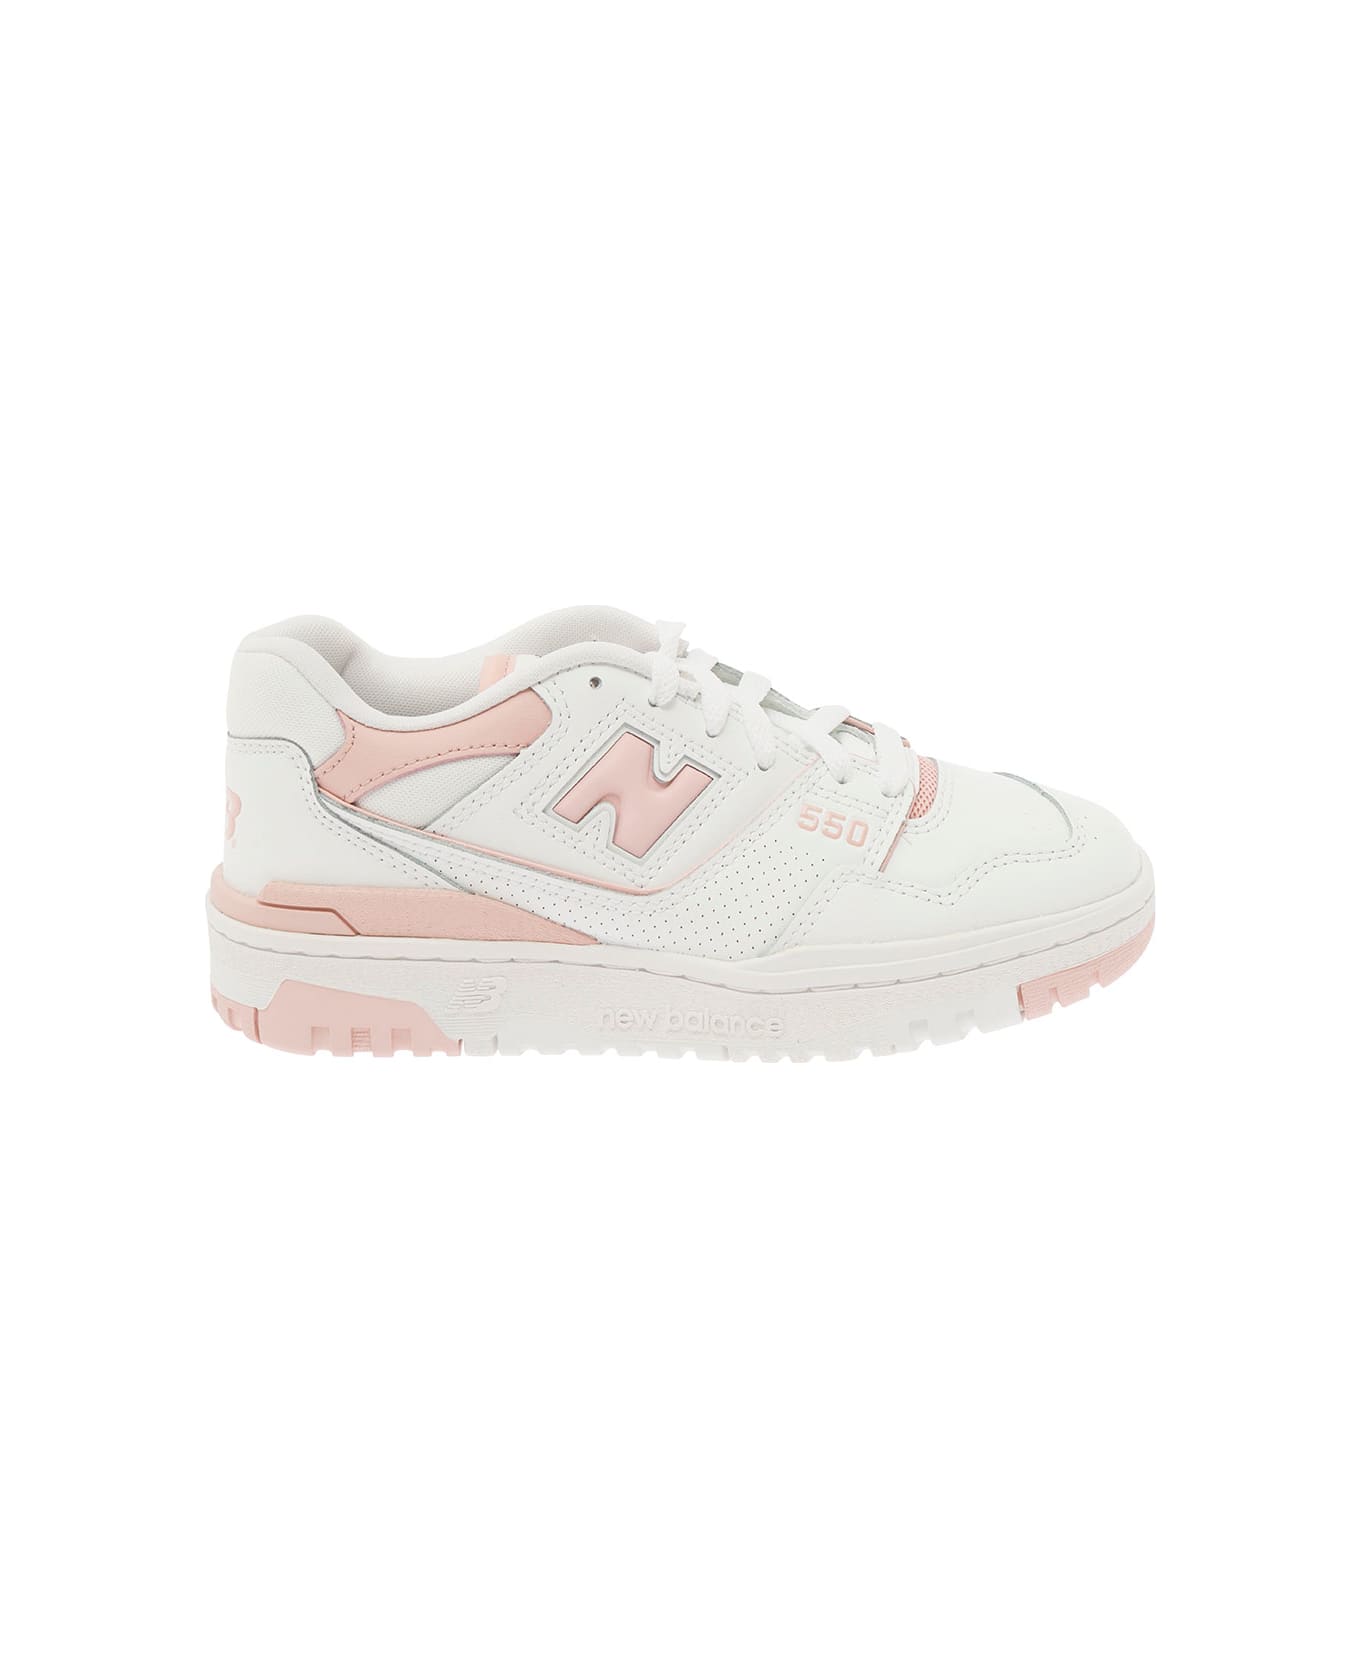 New Balance '550' White And Light Pink Low Top Sneakers With Logo In Leather Woman - Pink